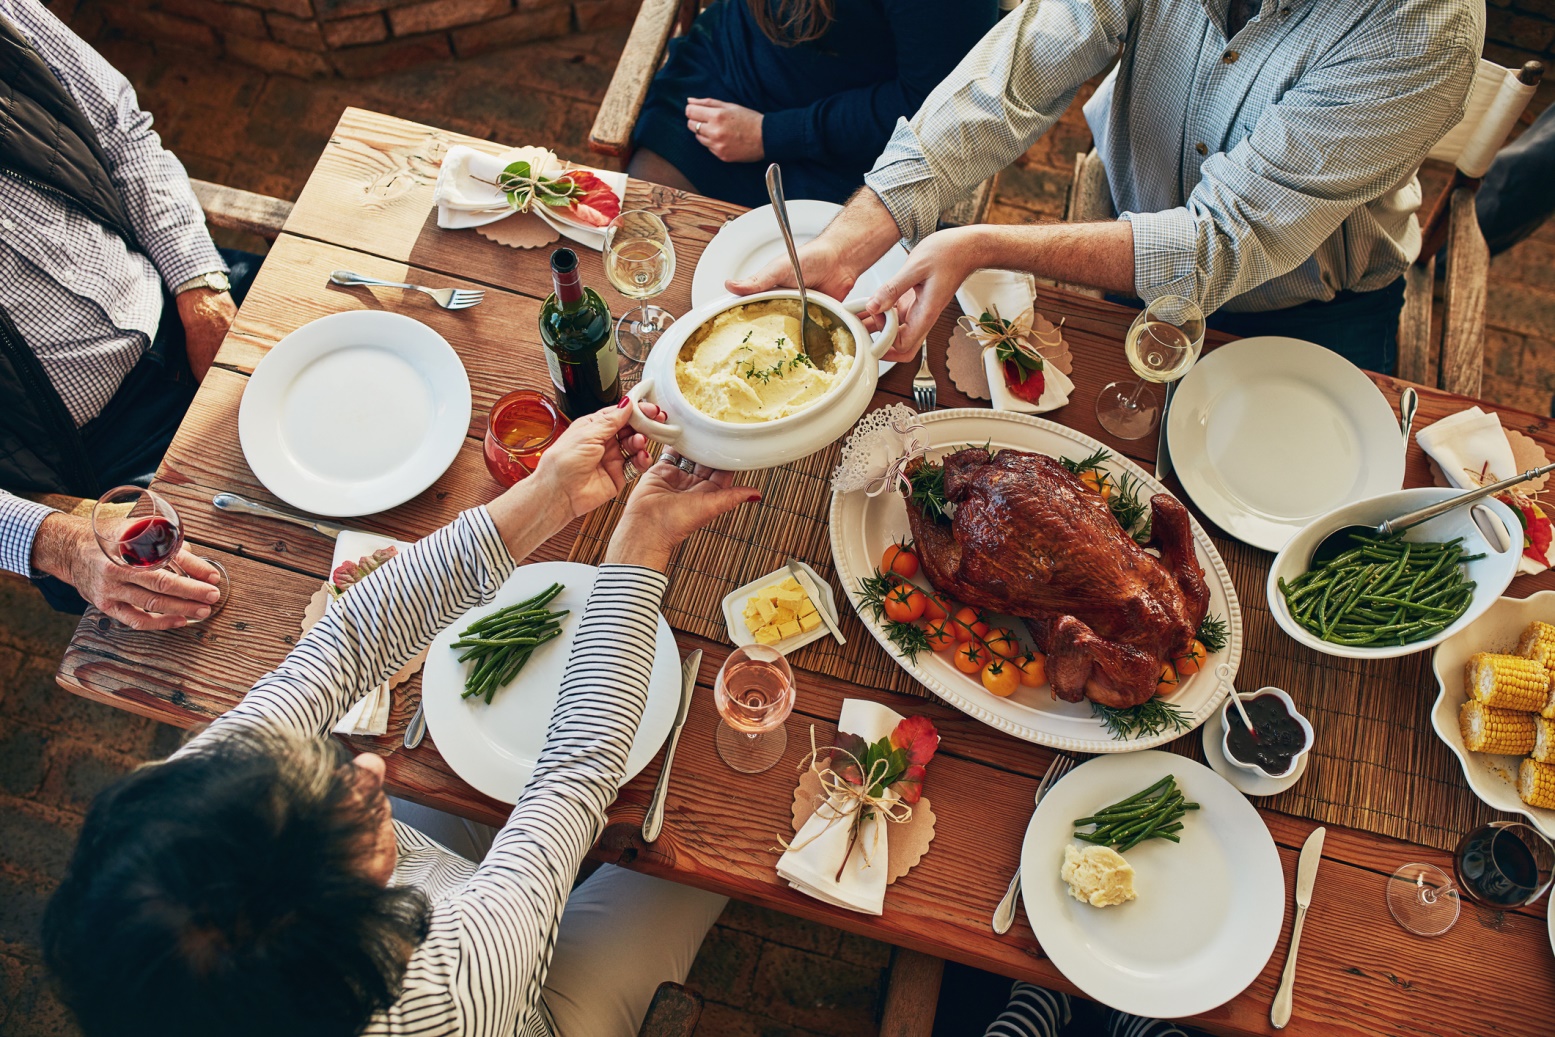 A holiday feast.